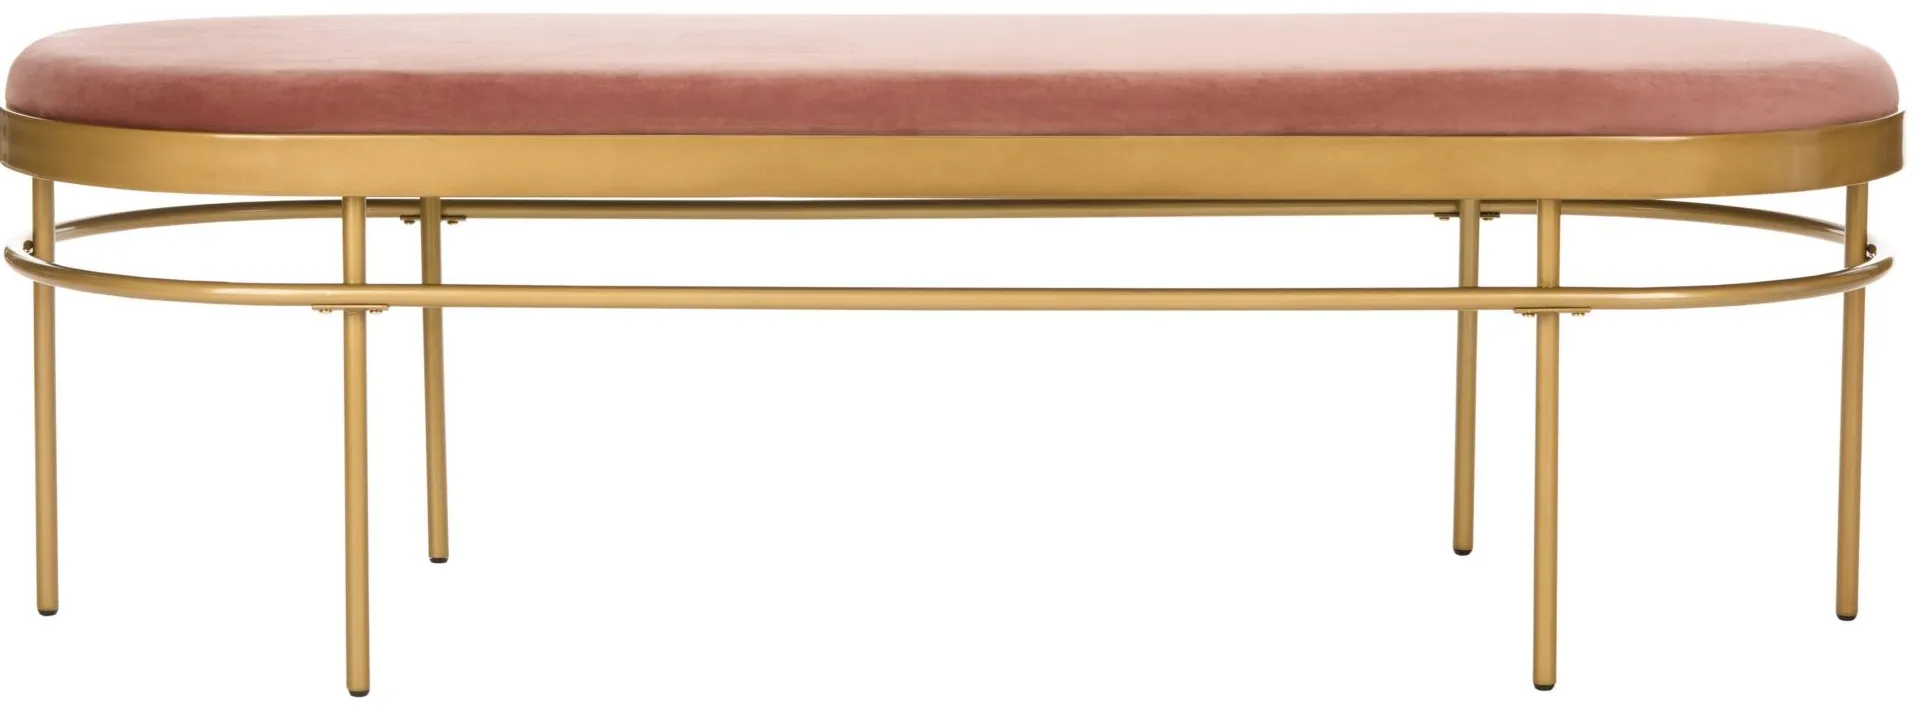 Sylvan Oval Bench in Dusty Rose / Gold by Safavieh